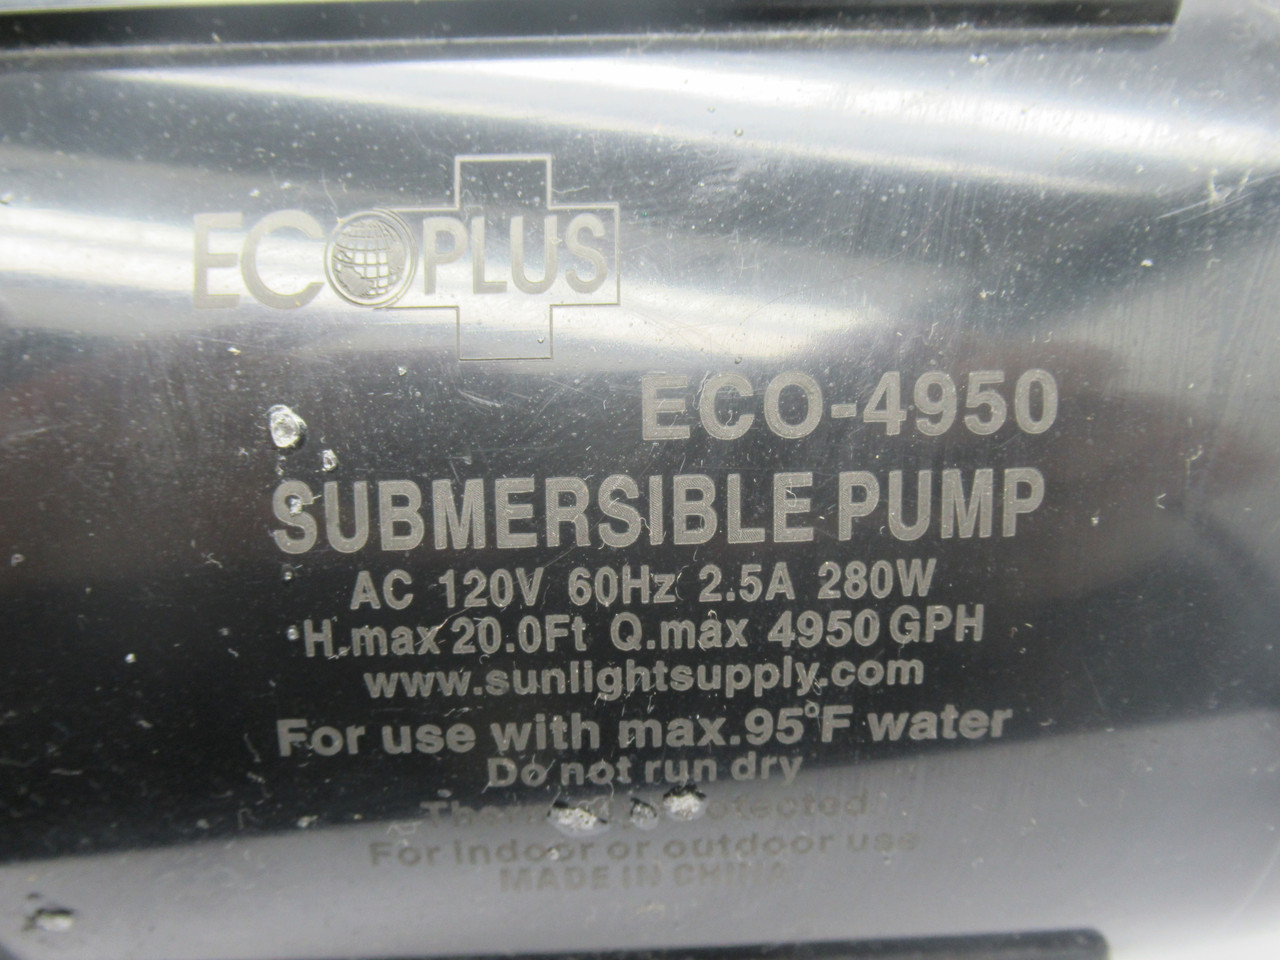 EcoPlus ECO-4950 Submersible Pump 120V 60Hz 2.5A 280W *Missing Accessories* USED